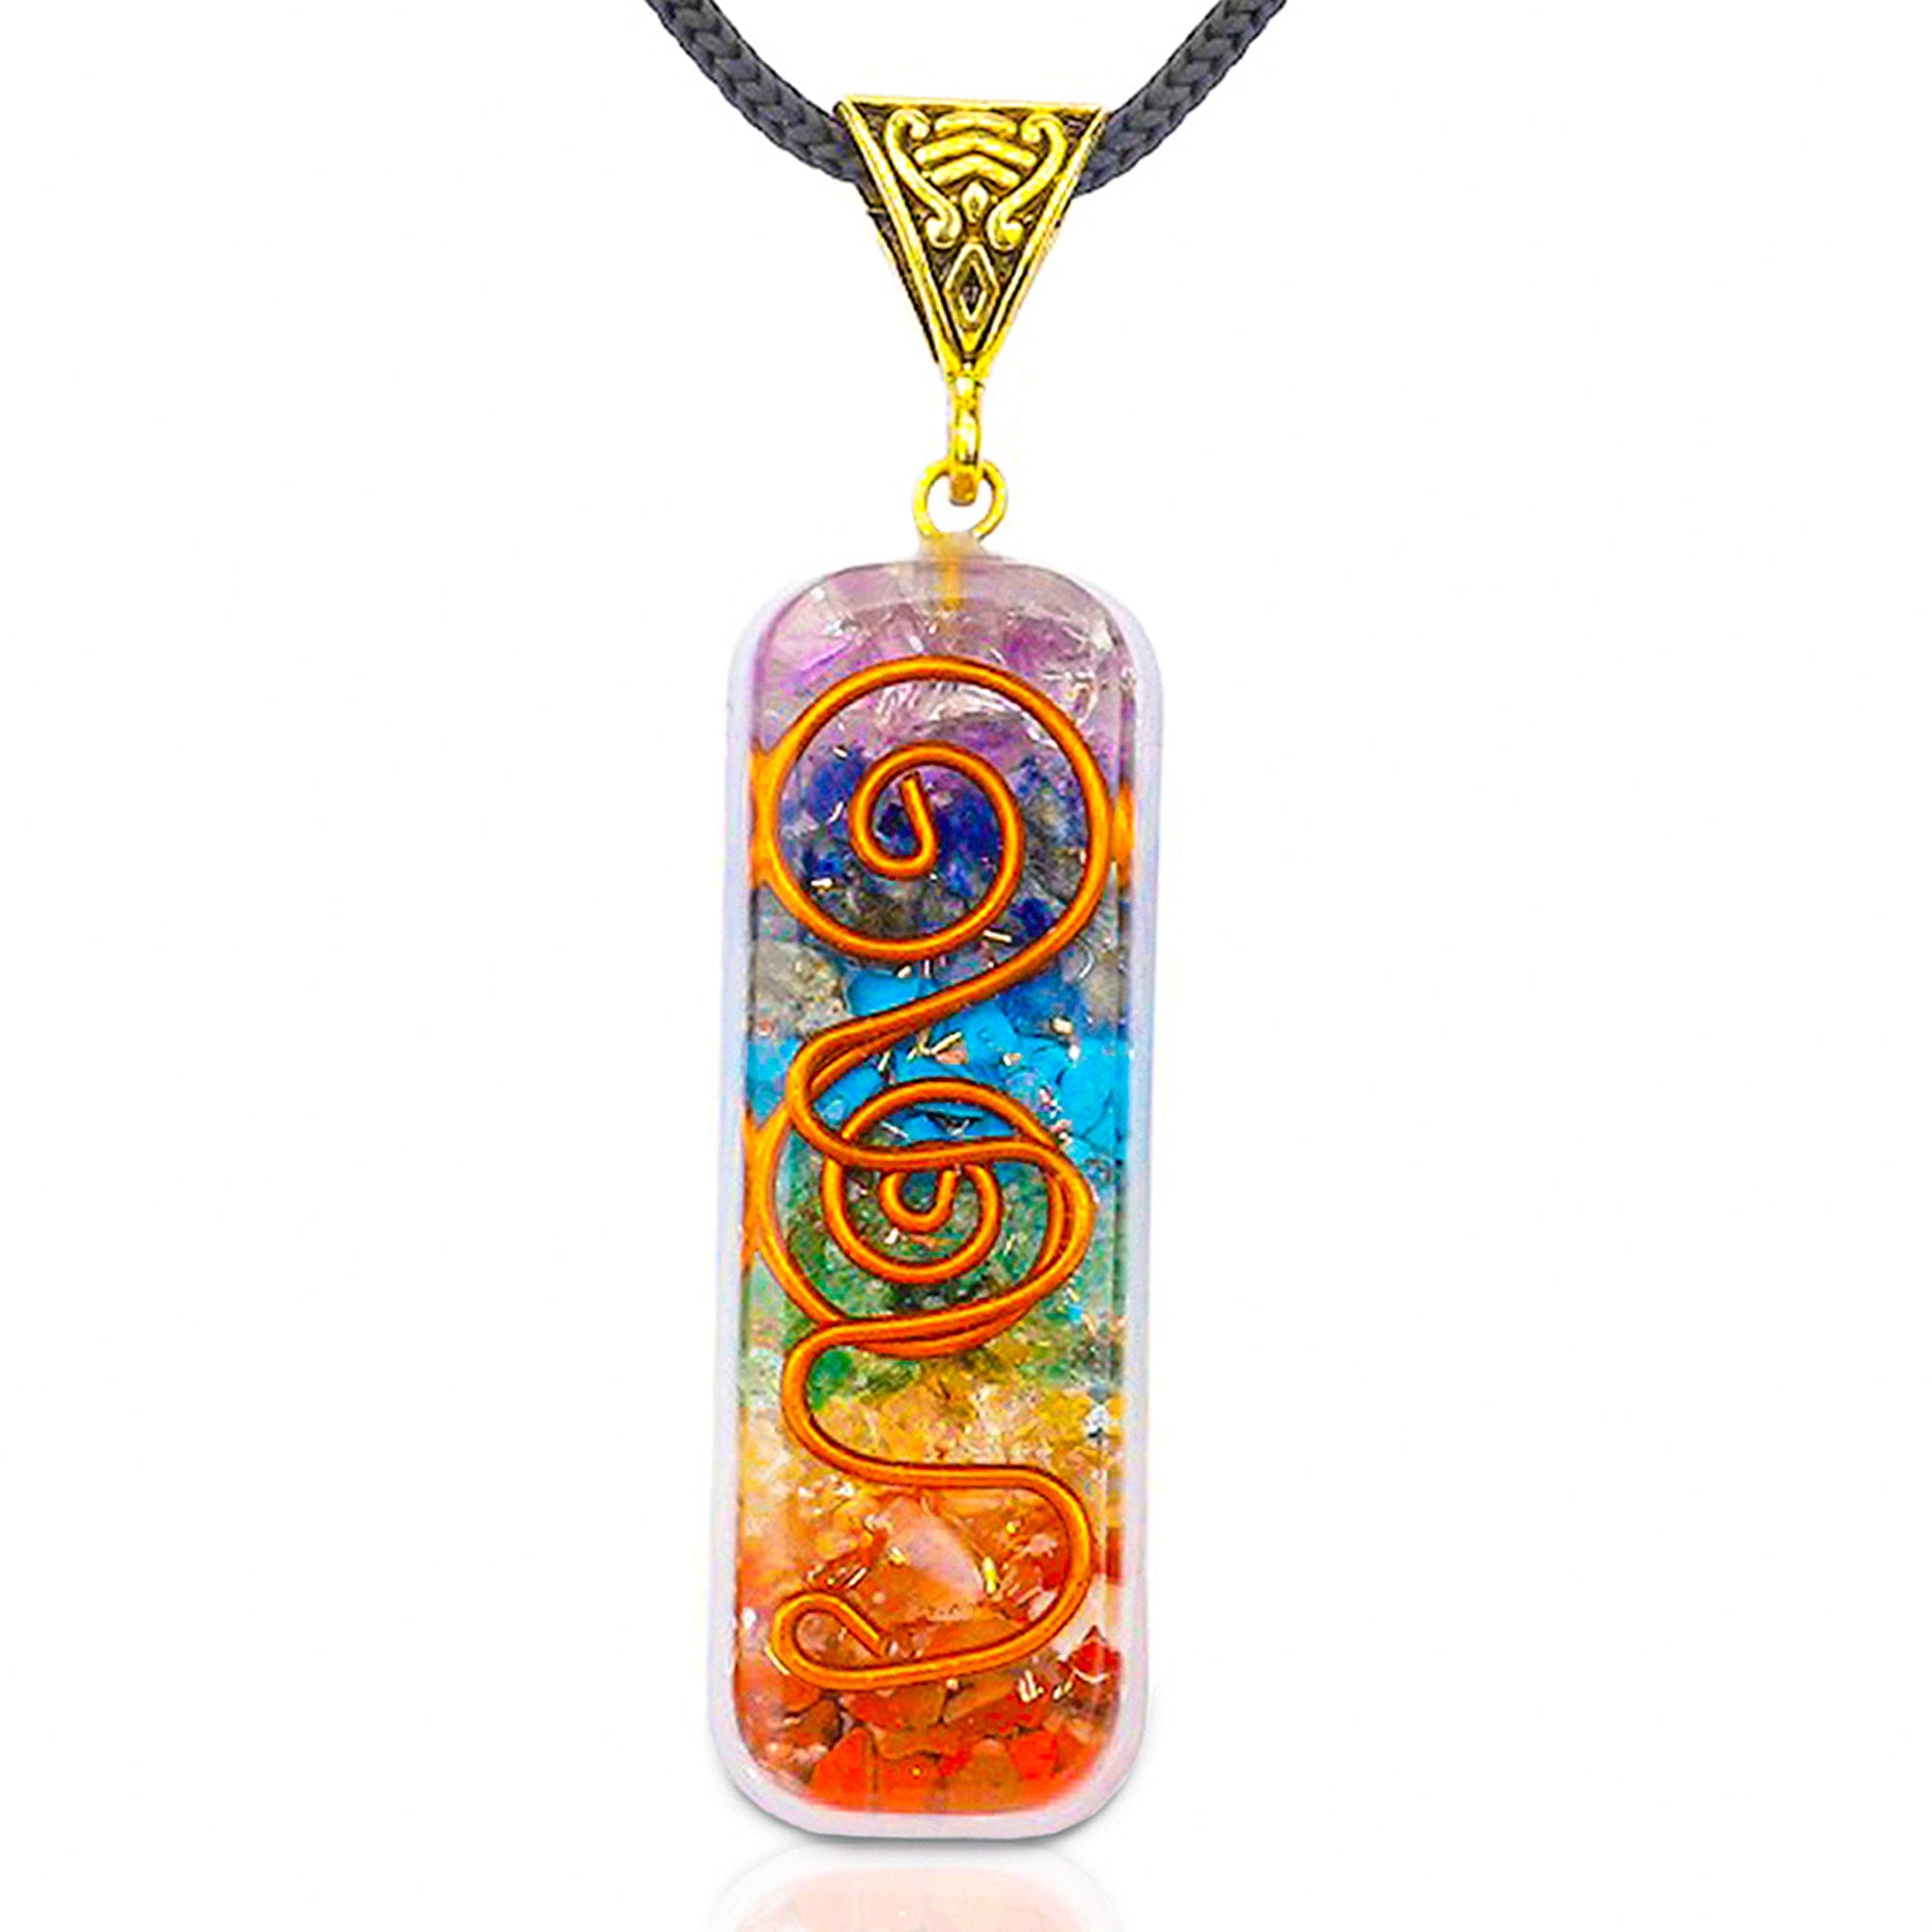 High Chi 7 Chakra Necklace Balance, Protection & Clear Perception